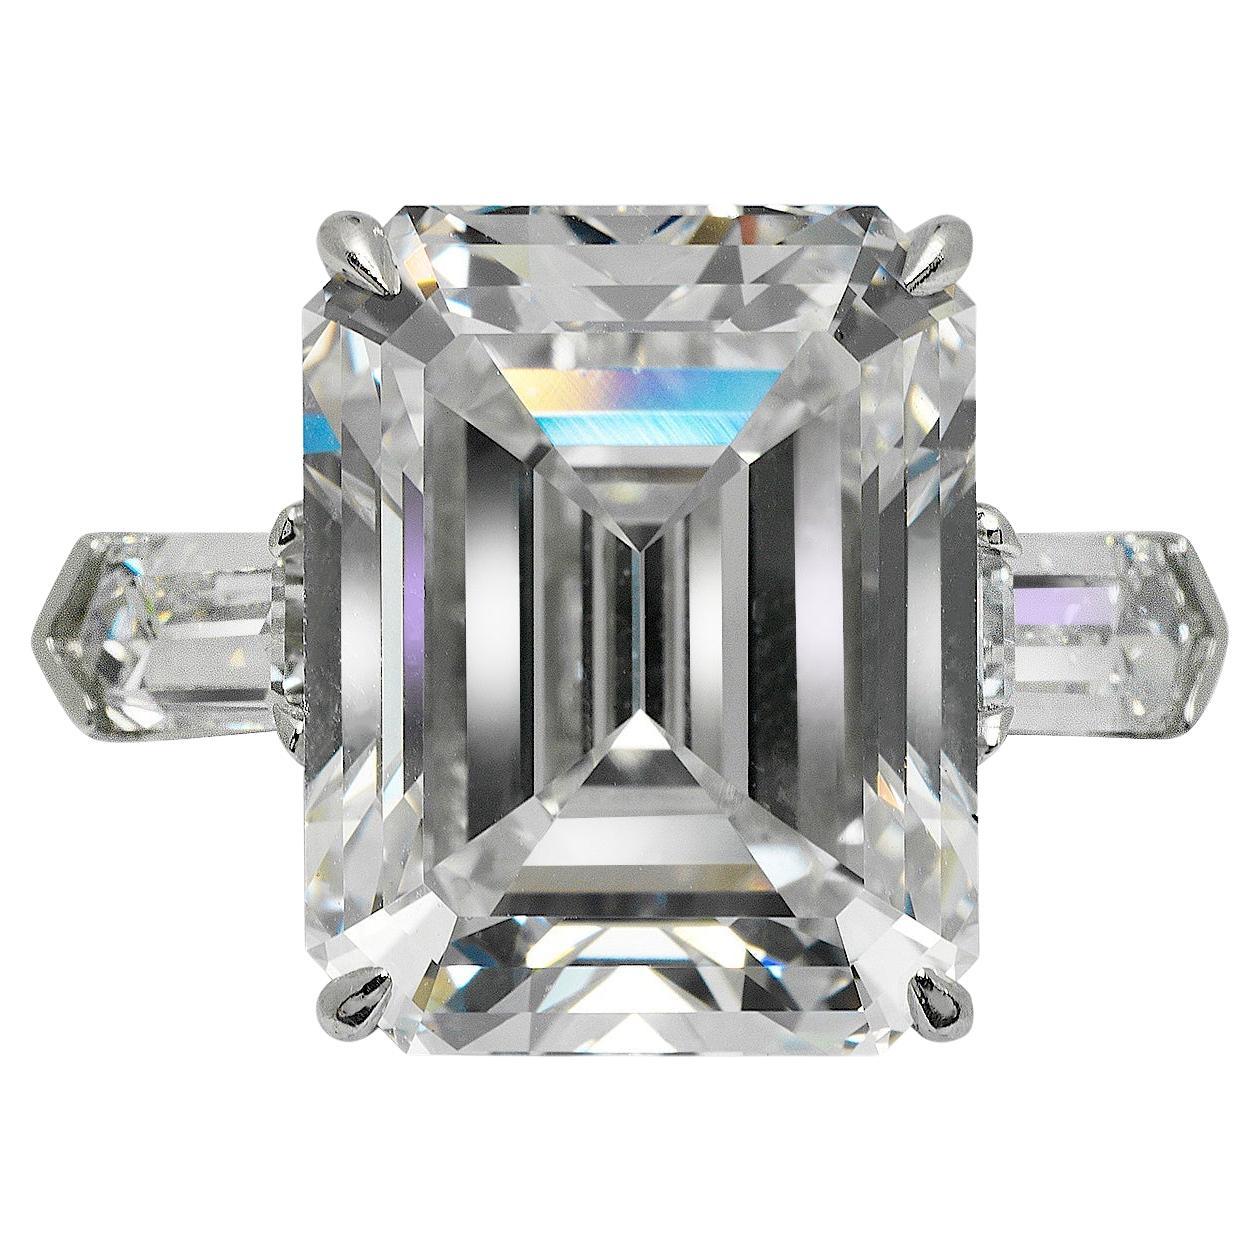 MELODY  EMERALD  DIAMOND ENGAGEMENT RING IN PLATINUM  BY MIKE NEKTA

GIA CERTIFIED
Center Diamond
Carat Weight: 14.6 Carats
Color :  D*
Clarity: VVS1
Style:  EMERALD CUT 
Measurements:  16.3 x 11.7 x 7.7 mm
*Color Treated
 
Ring:
Metal: